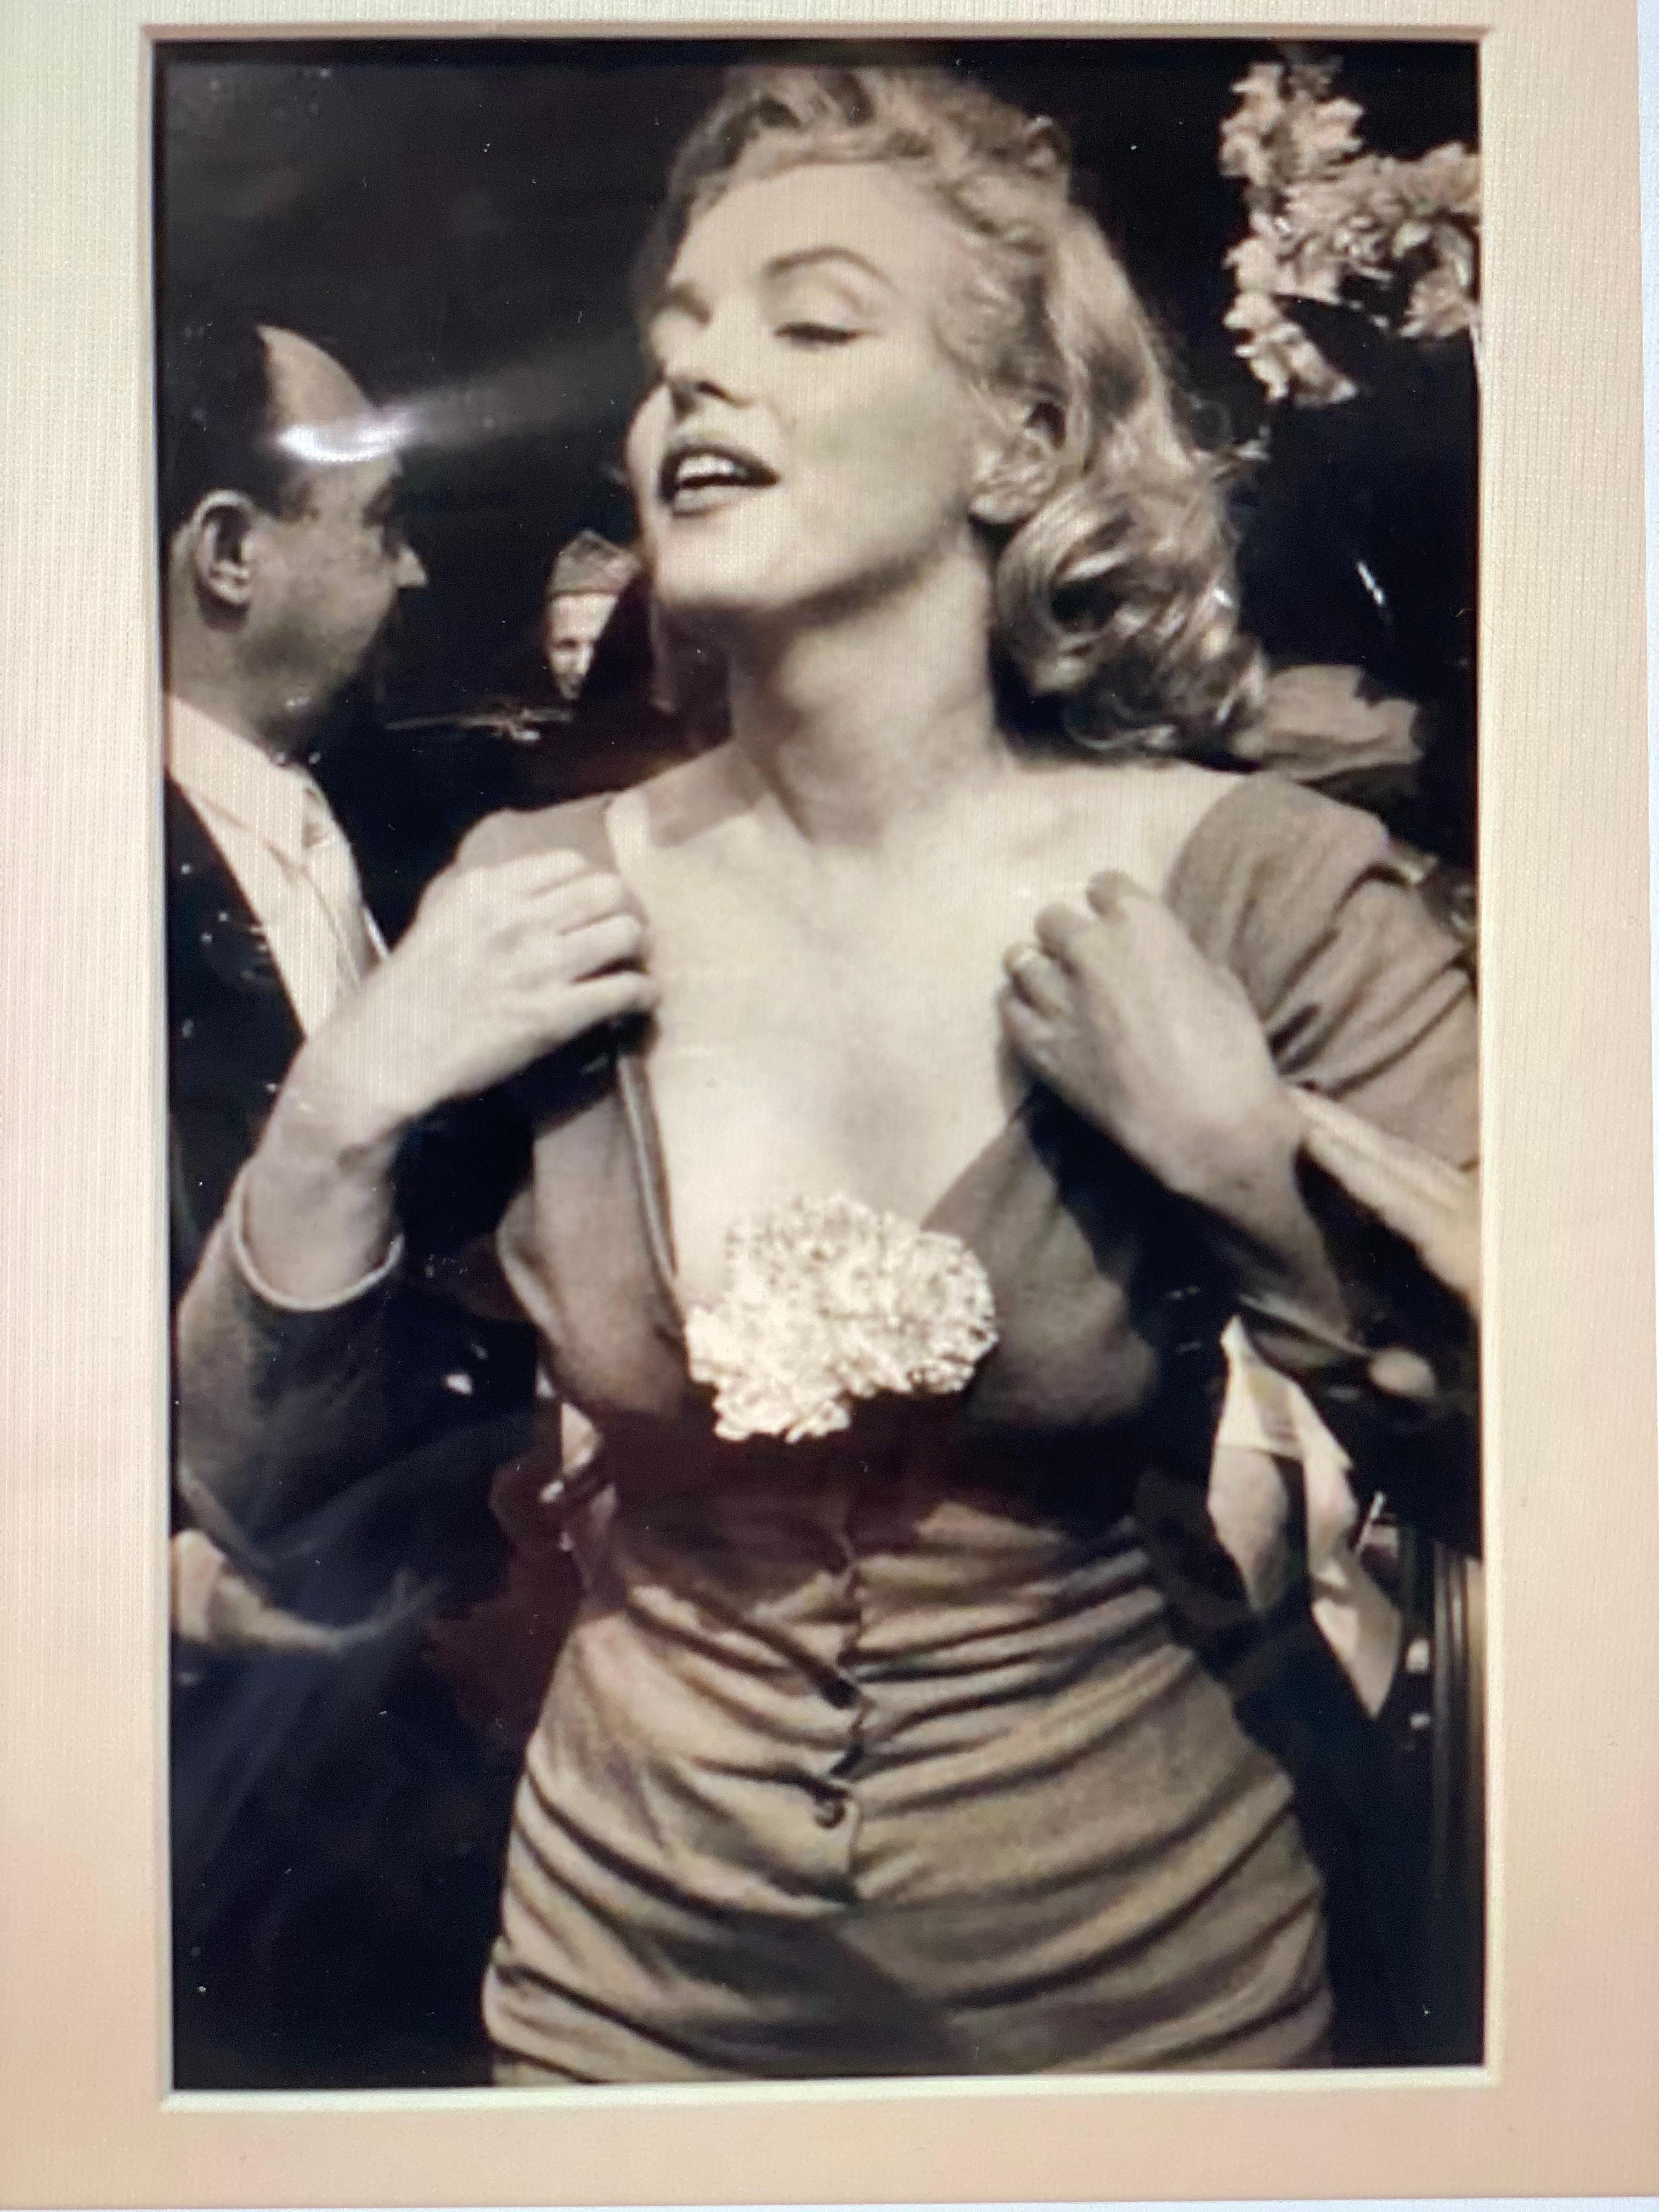 Sam Shaw 
Marilyn Monroe 
Cocktail party during the USA - Israel football match at Ebbets Field New York .
1959
Vintage silver print by Sam Shaw
Mounted on cardboard 
Signed, dated and captioned in pencil on the back.
34.3 x 21.2 cms
1900 euros 